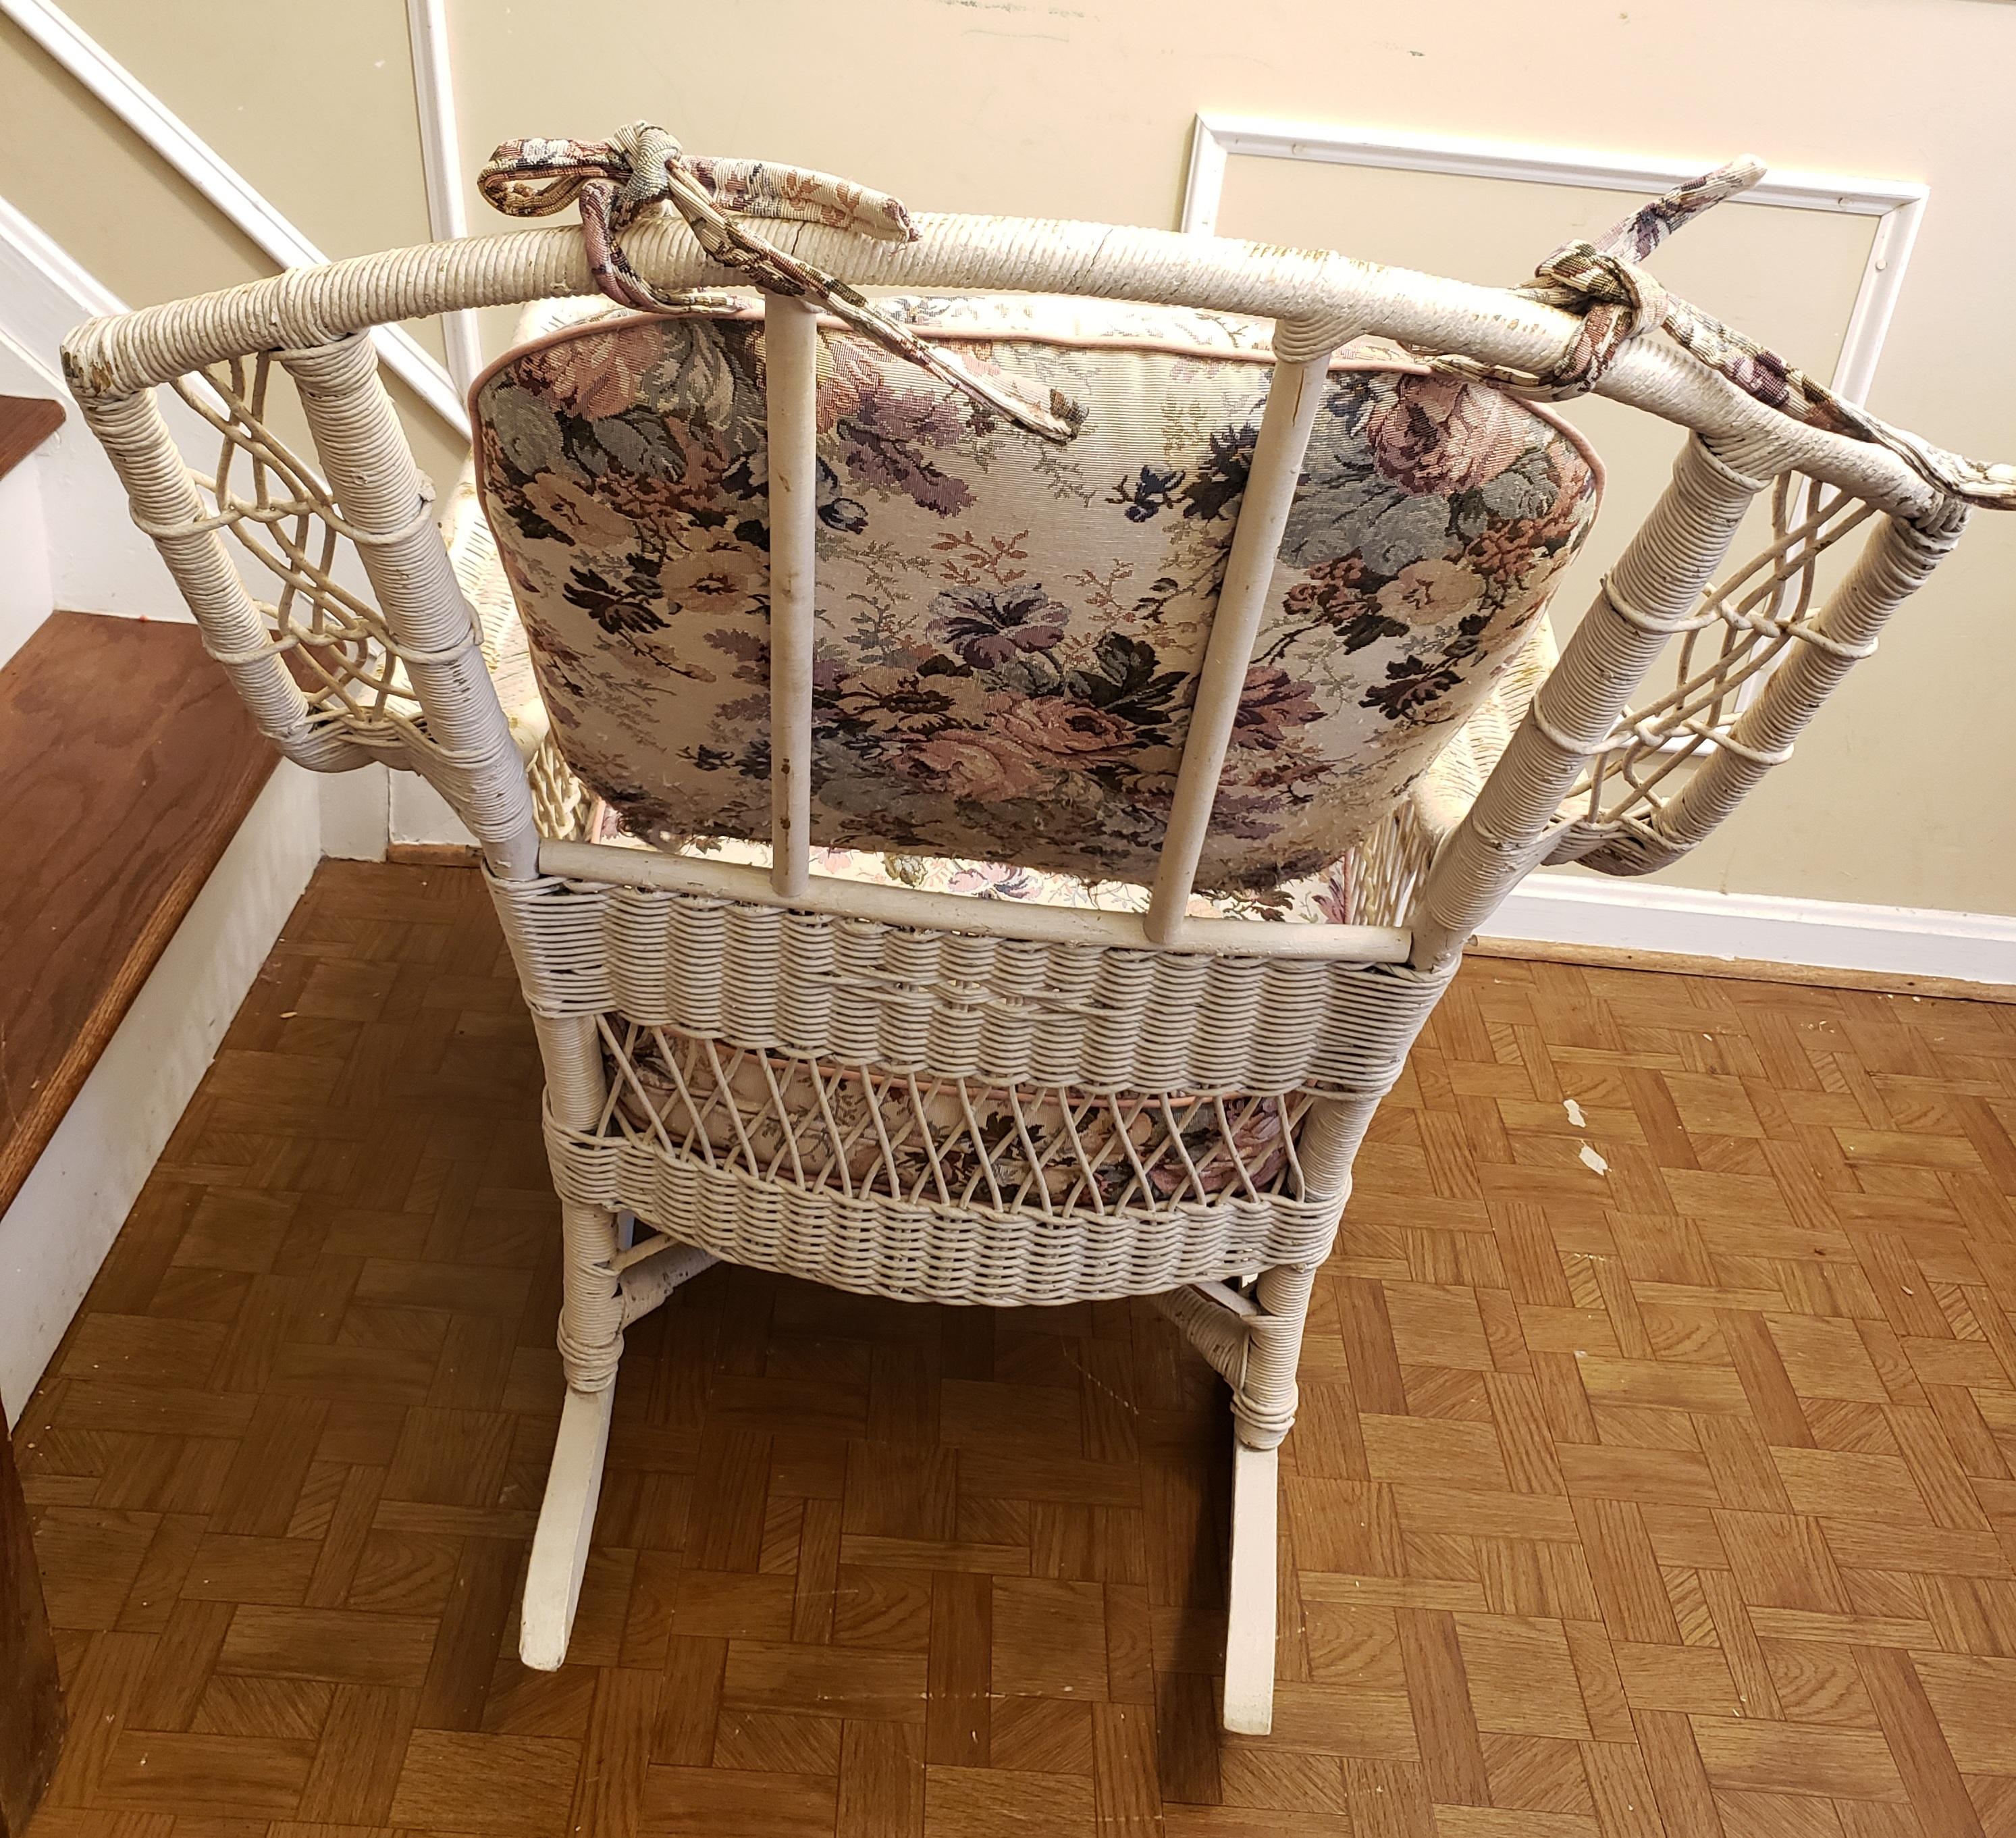 antique wicker rocking chair with springs